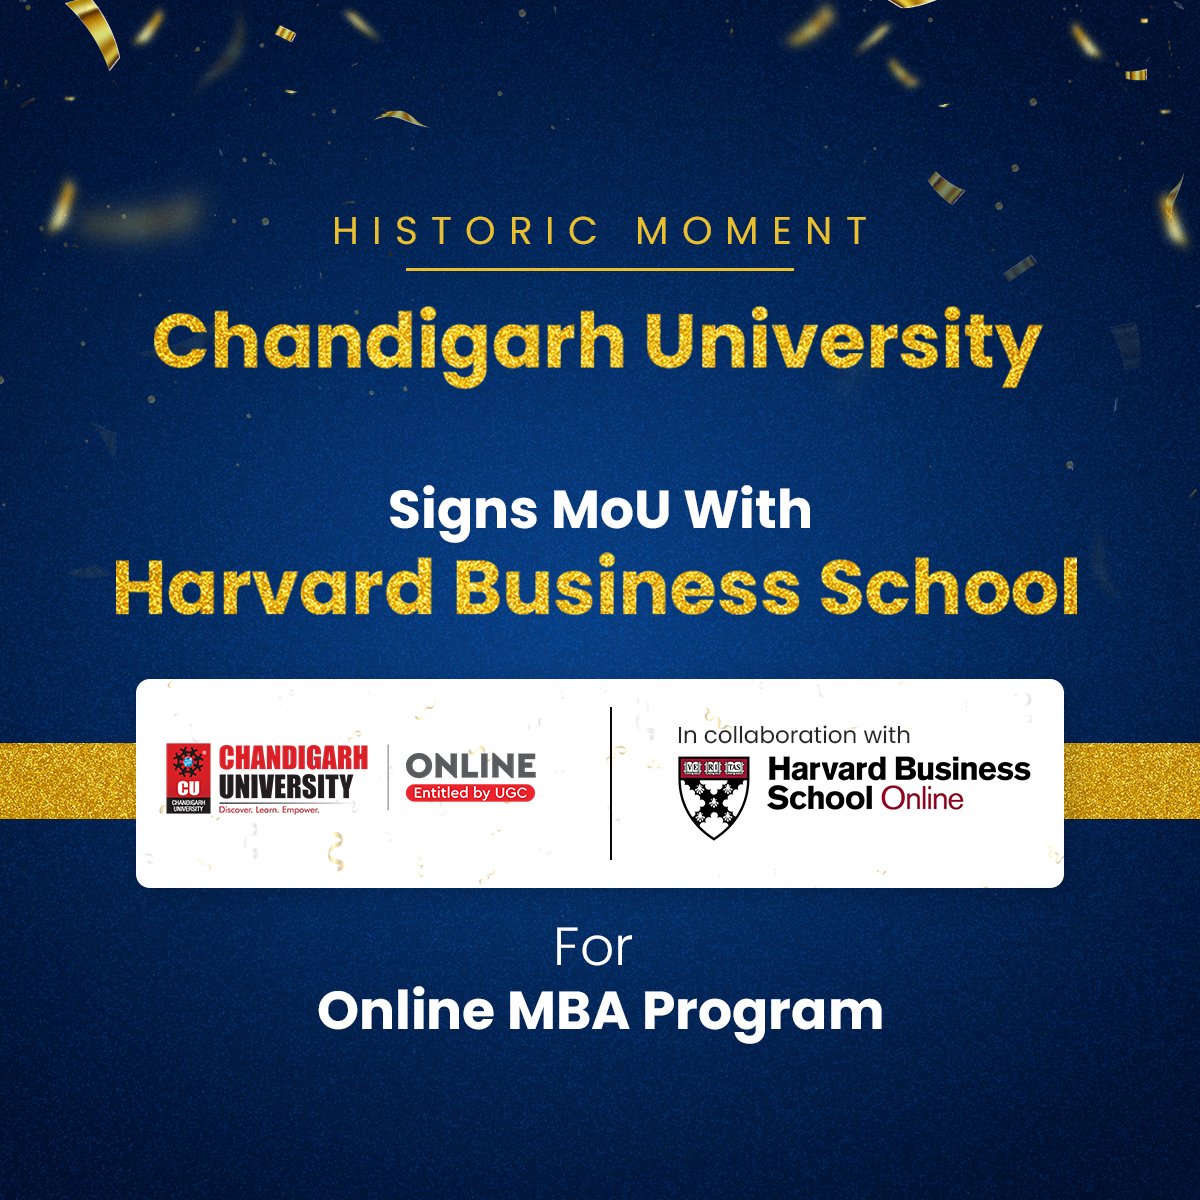 HISTORIC MOMENT! 
Chandigarh University inks a groundbreaking MoU with Harvard Business School Online for an online MBA program. A monumental step in shaping tomorrow's business leaders!
Follow this space for more updates...

#ChandigarhUniversityOnline #OnlineMBA #CUOnline